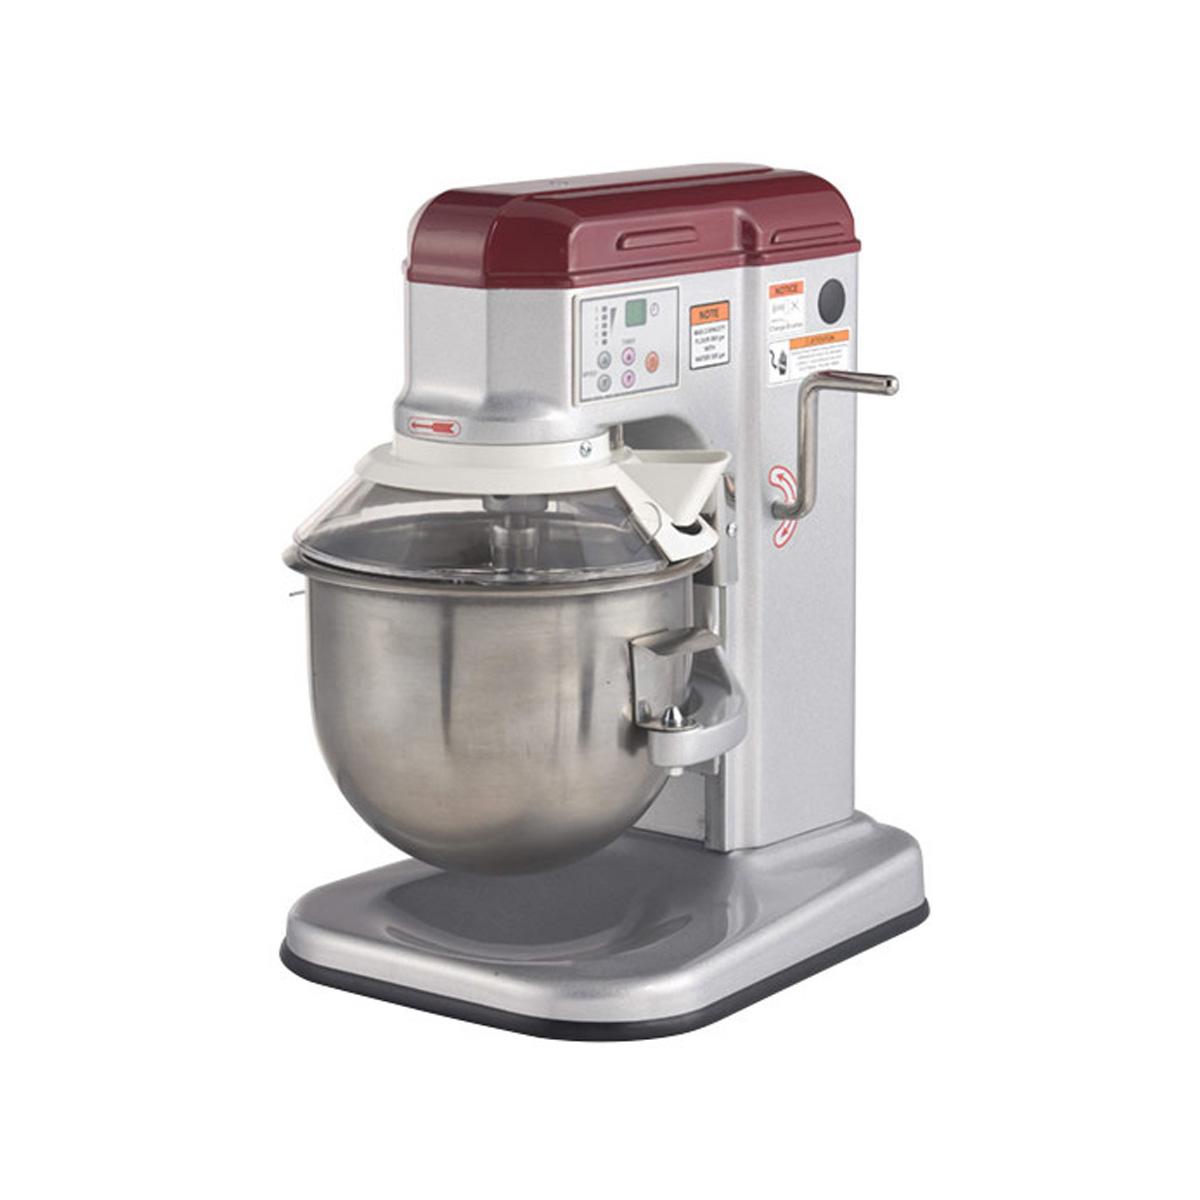 Axis AX-M7 Countertop Commercial Planetary Mixer, 7 qt. Capacity, 3-Speed